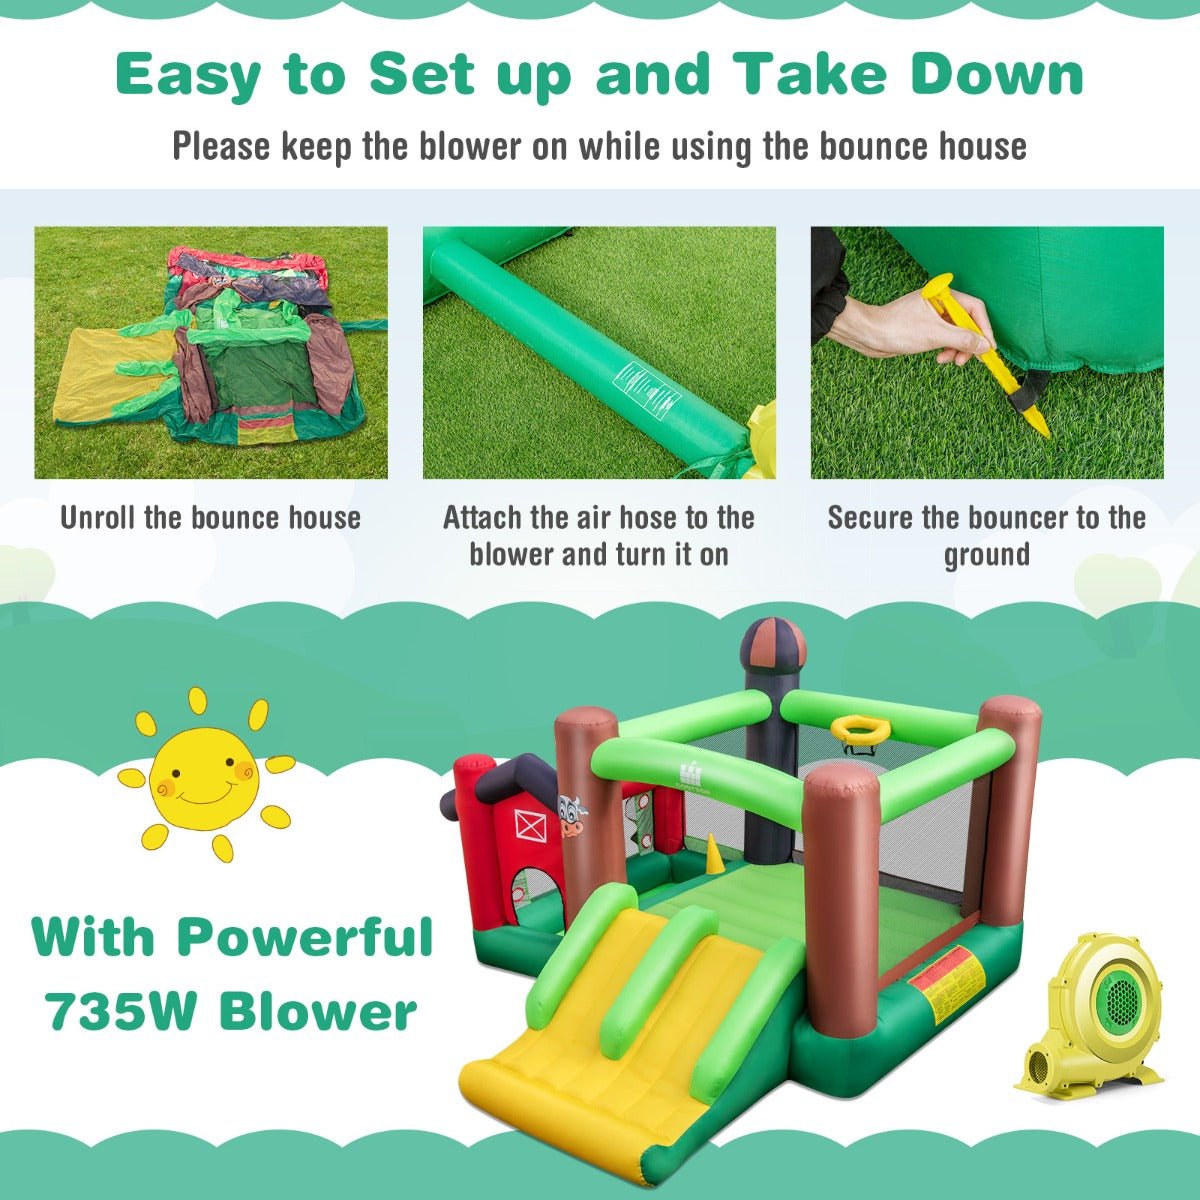 Children's Inflatable Bounce Castle - Double Slides and Outdoor Joy (Blower Included)